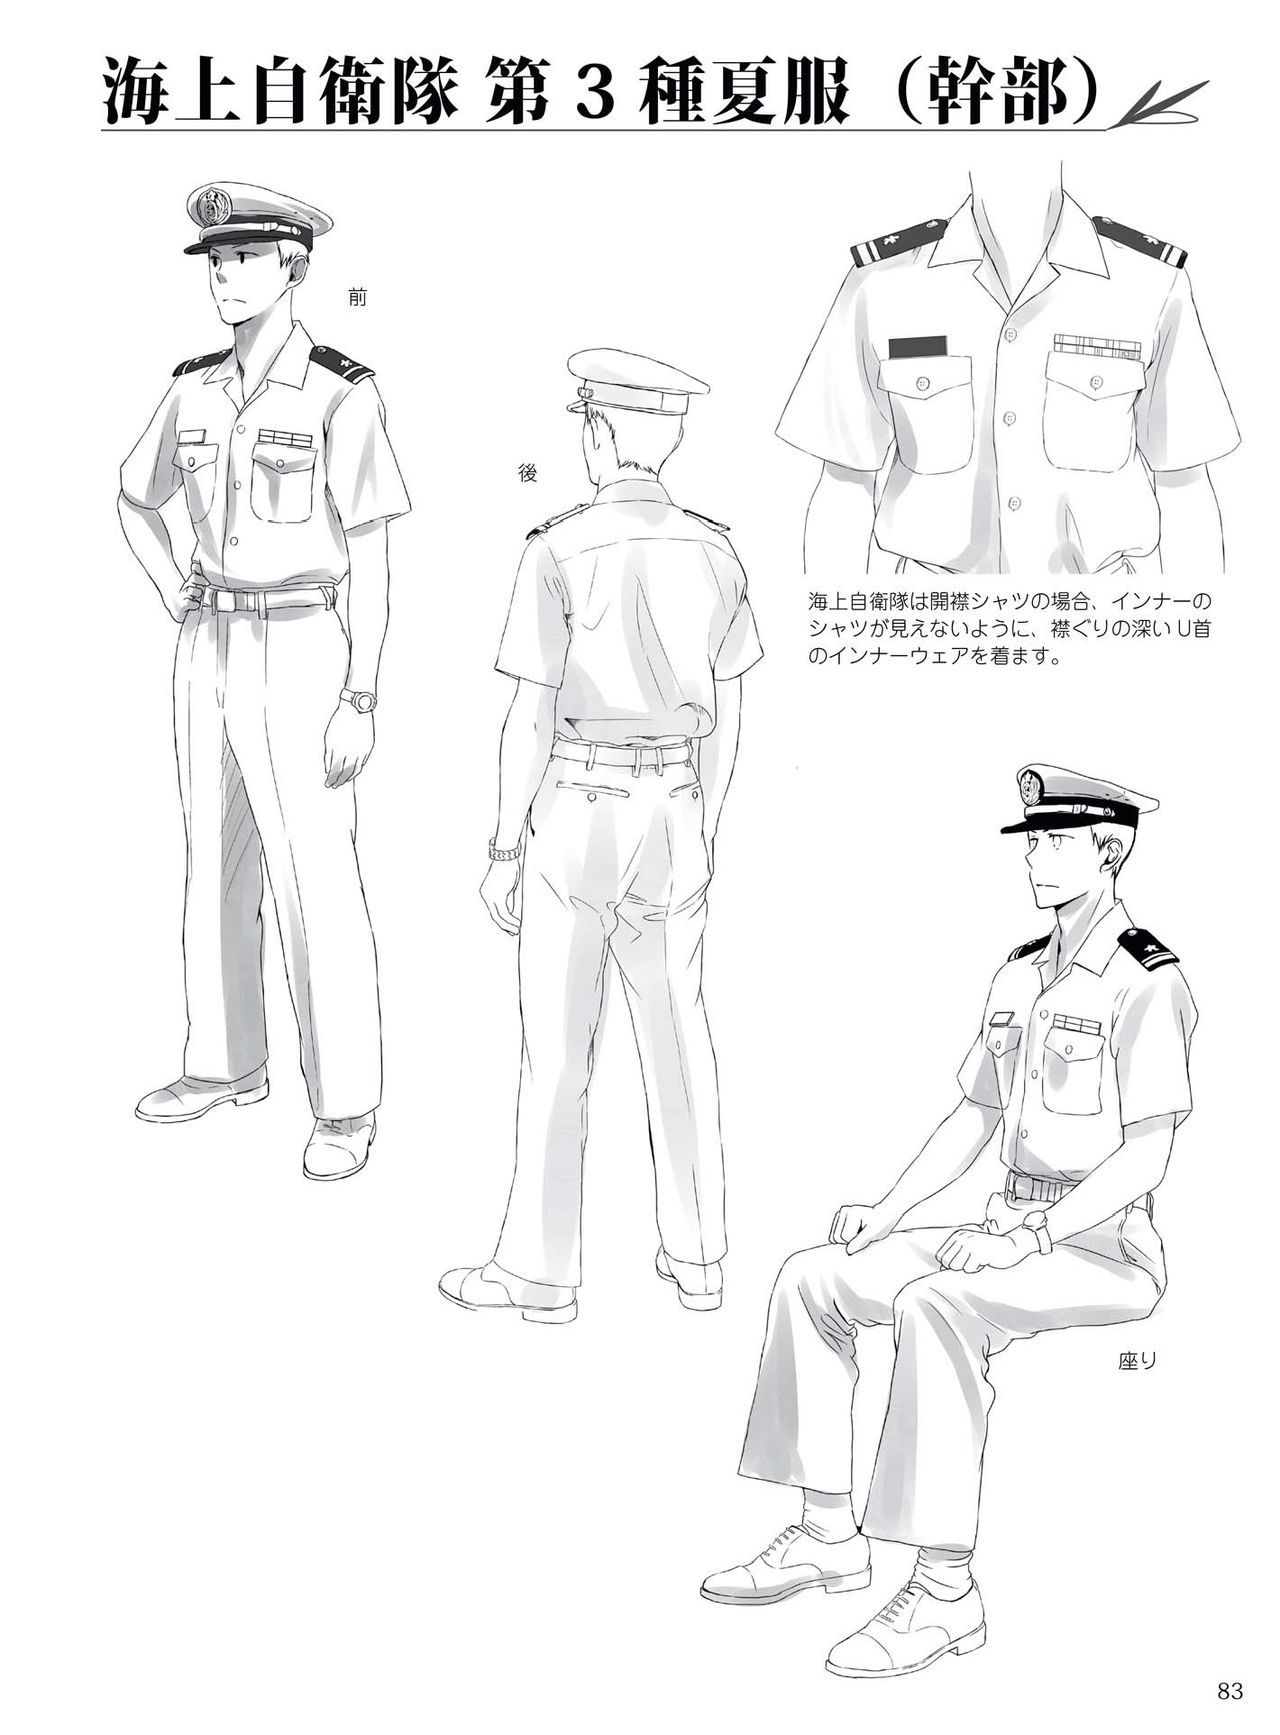 How to draw military uniforms and uniforms From Self-Defense Forces 軍服・制服の描き方 アメリカ軍・自衛隊の制服から戦闘服まで 86